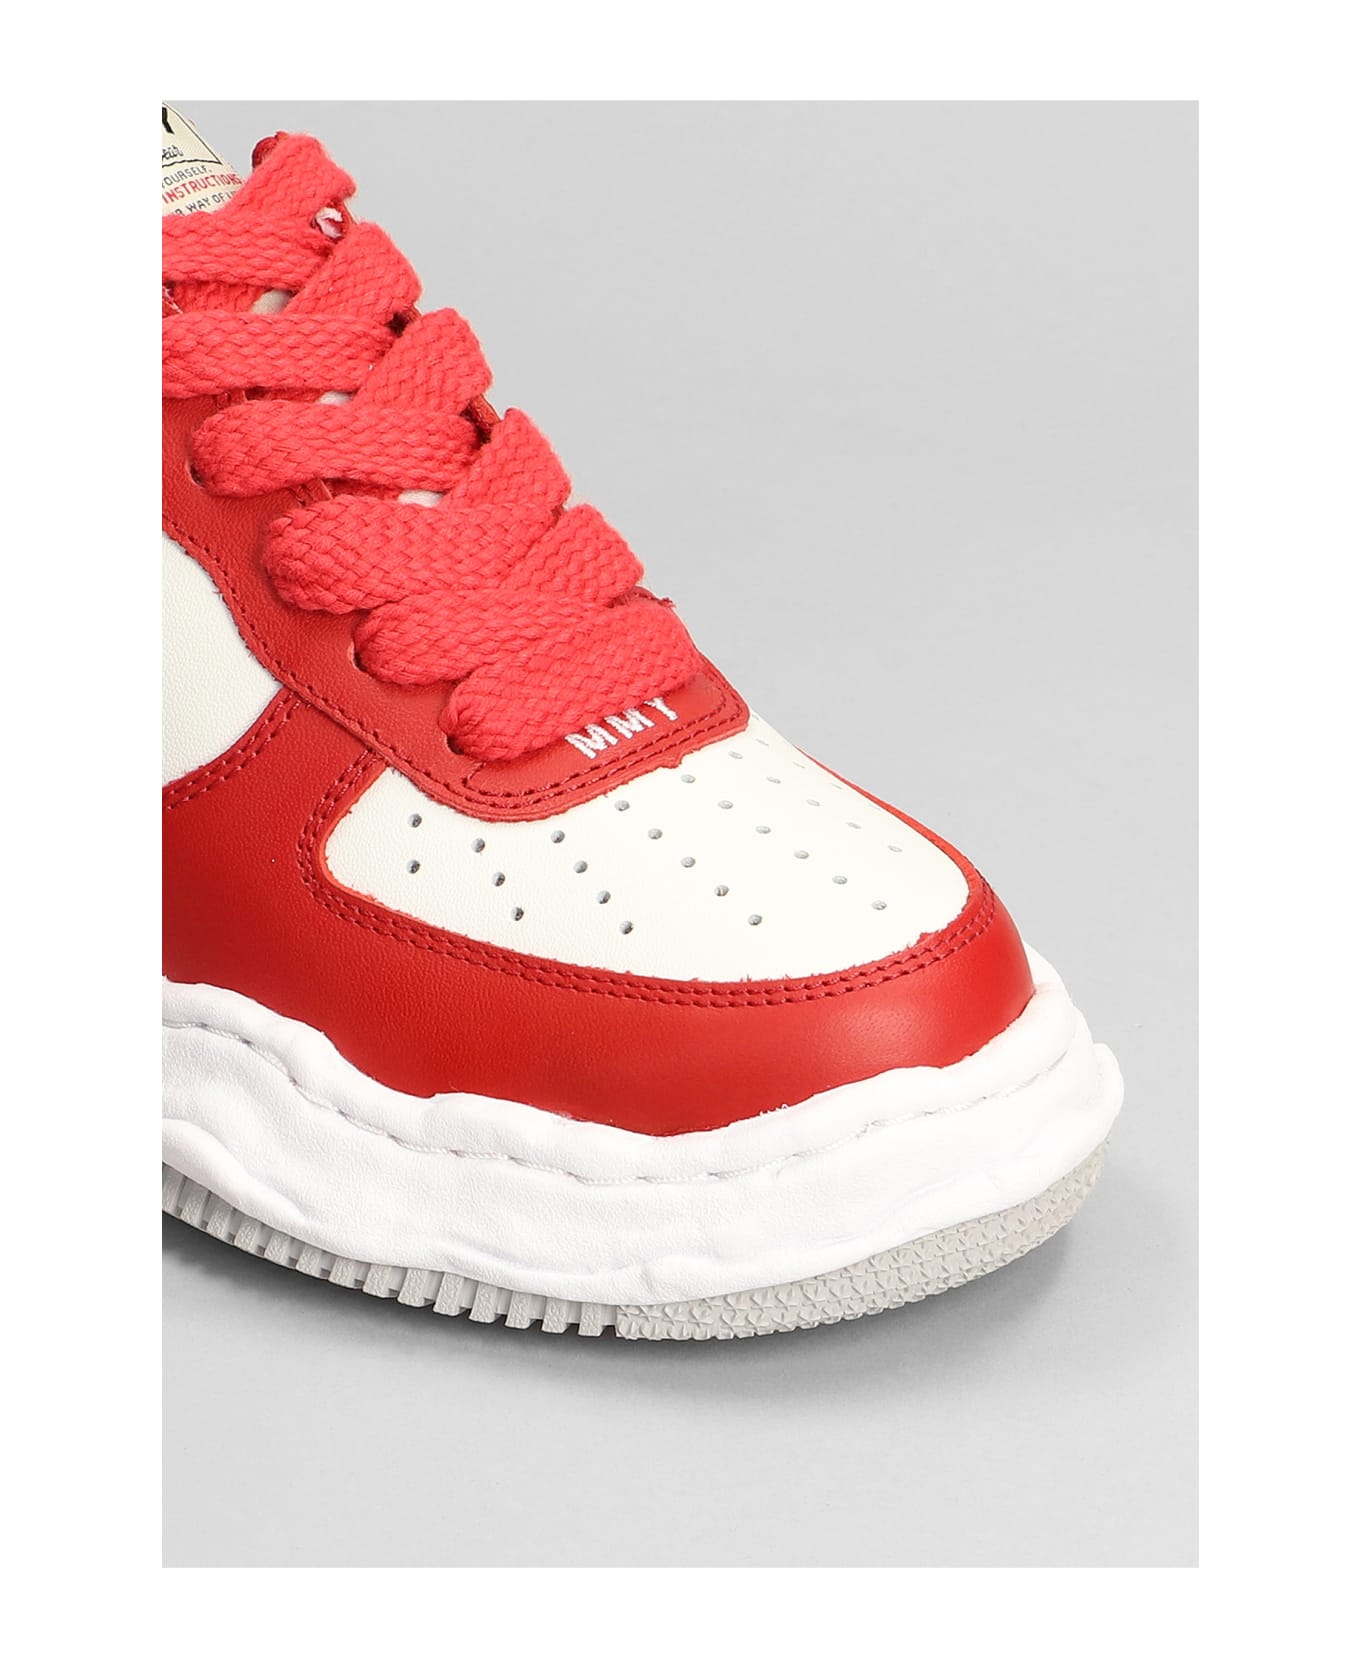 Mihara Yasuhiro Waney Sneakers In Red Leather - red スニーカー